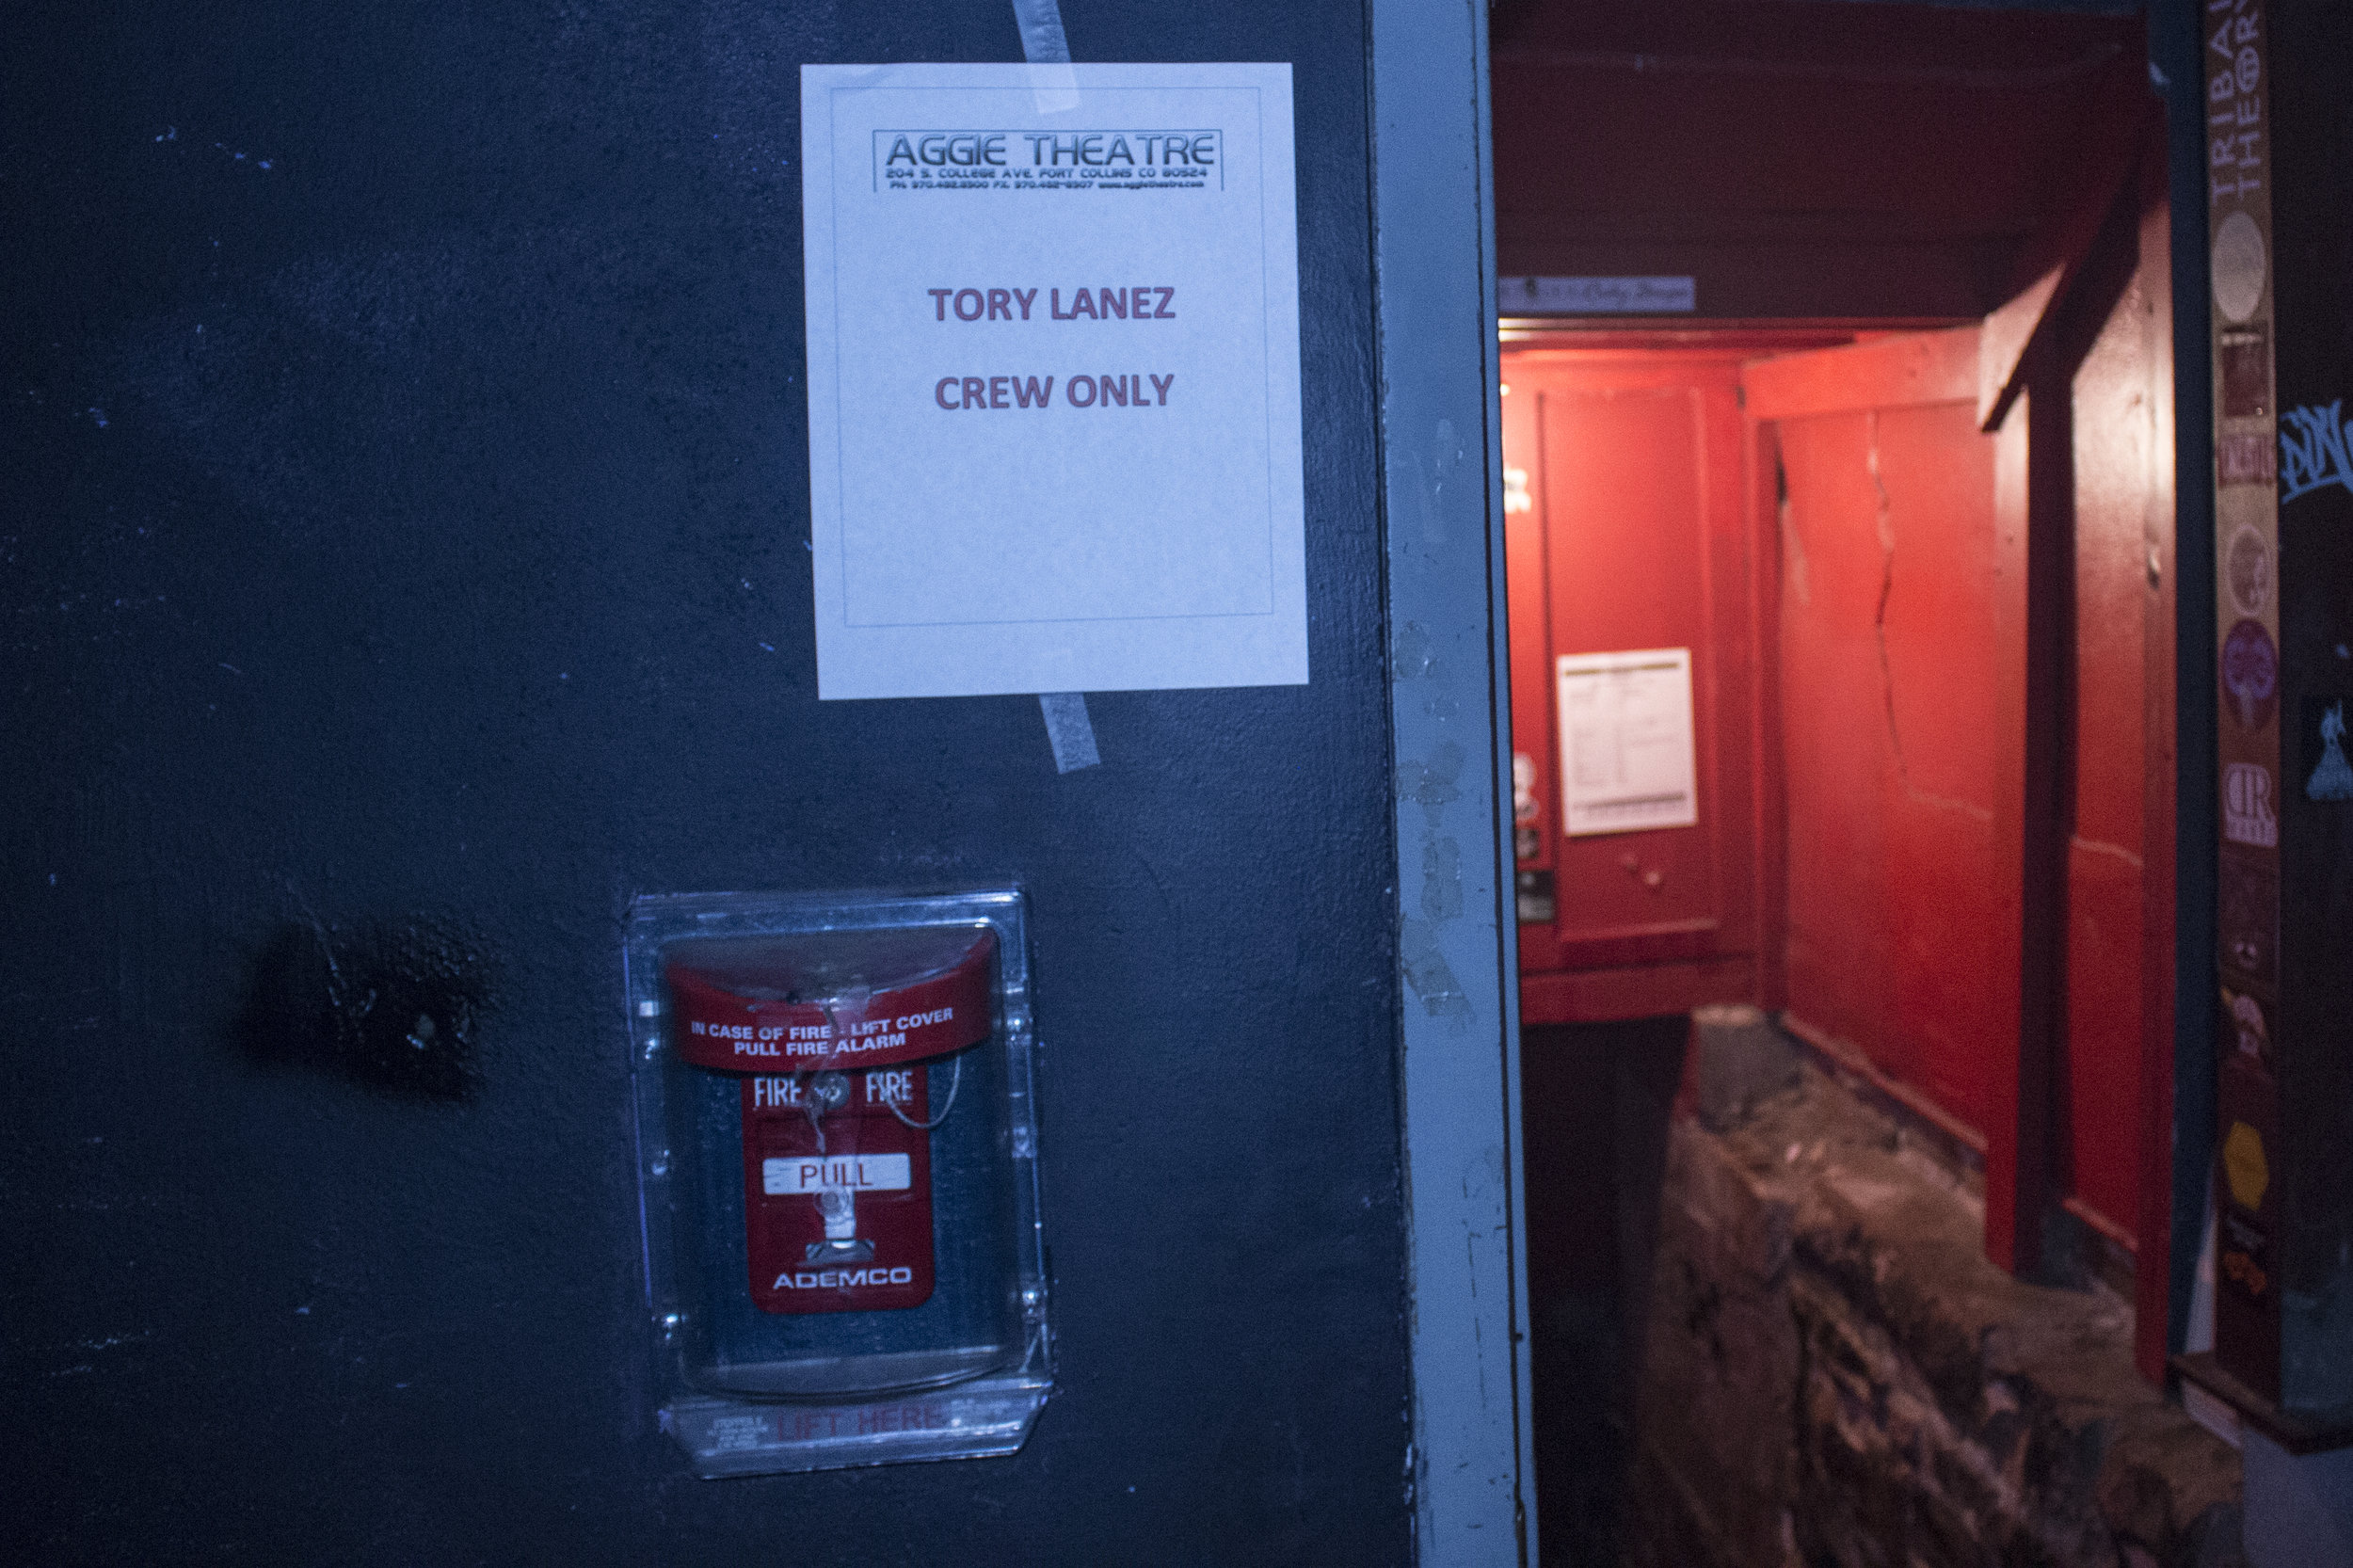 Tory Lanez Aggie Theatre October 18th, 2016_8.JPG